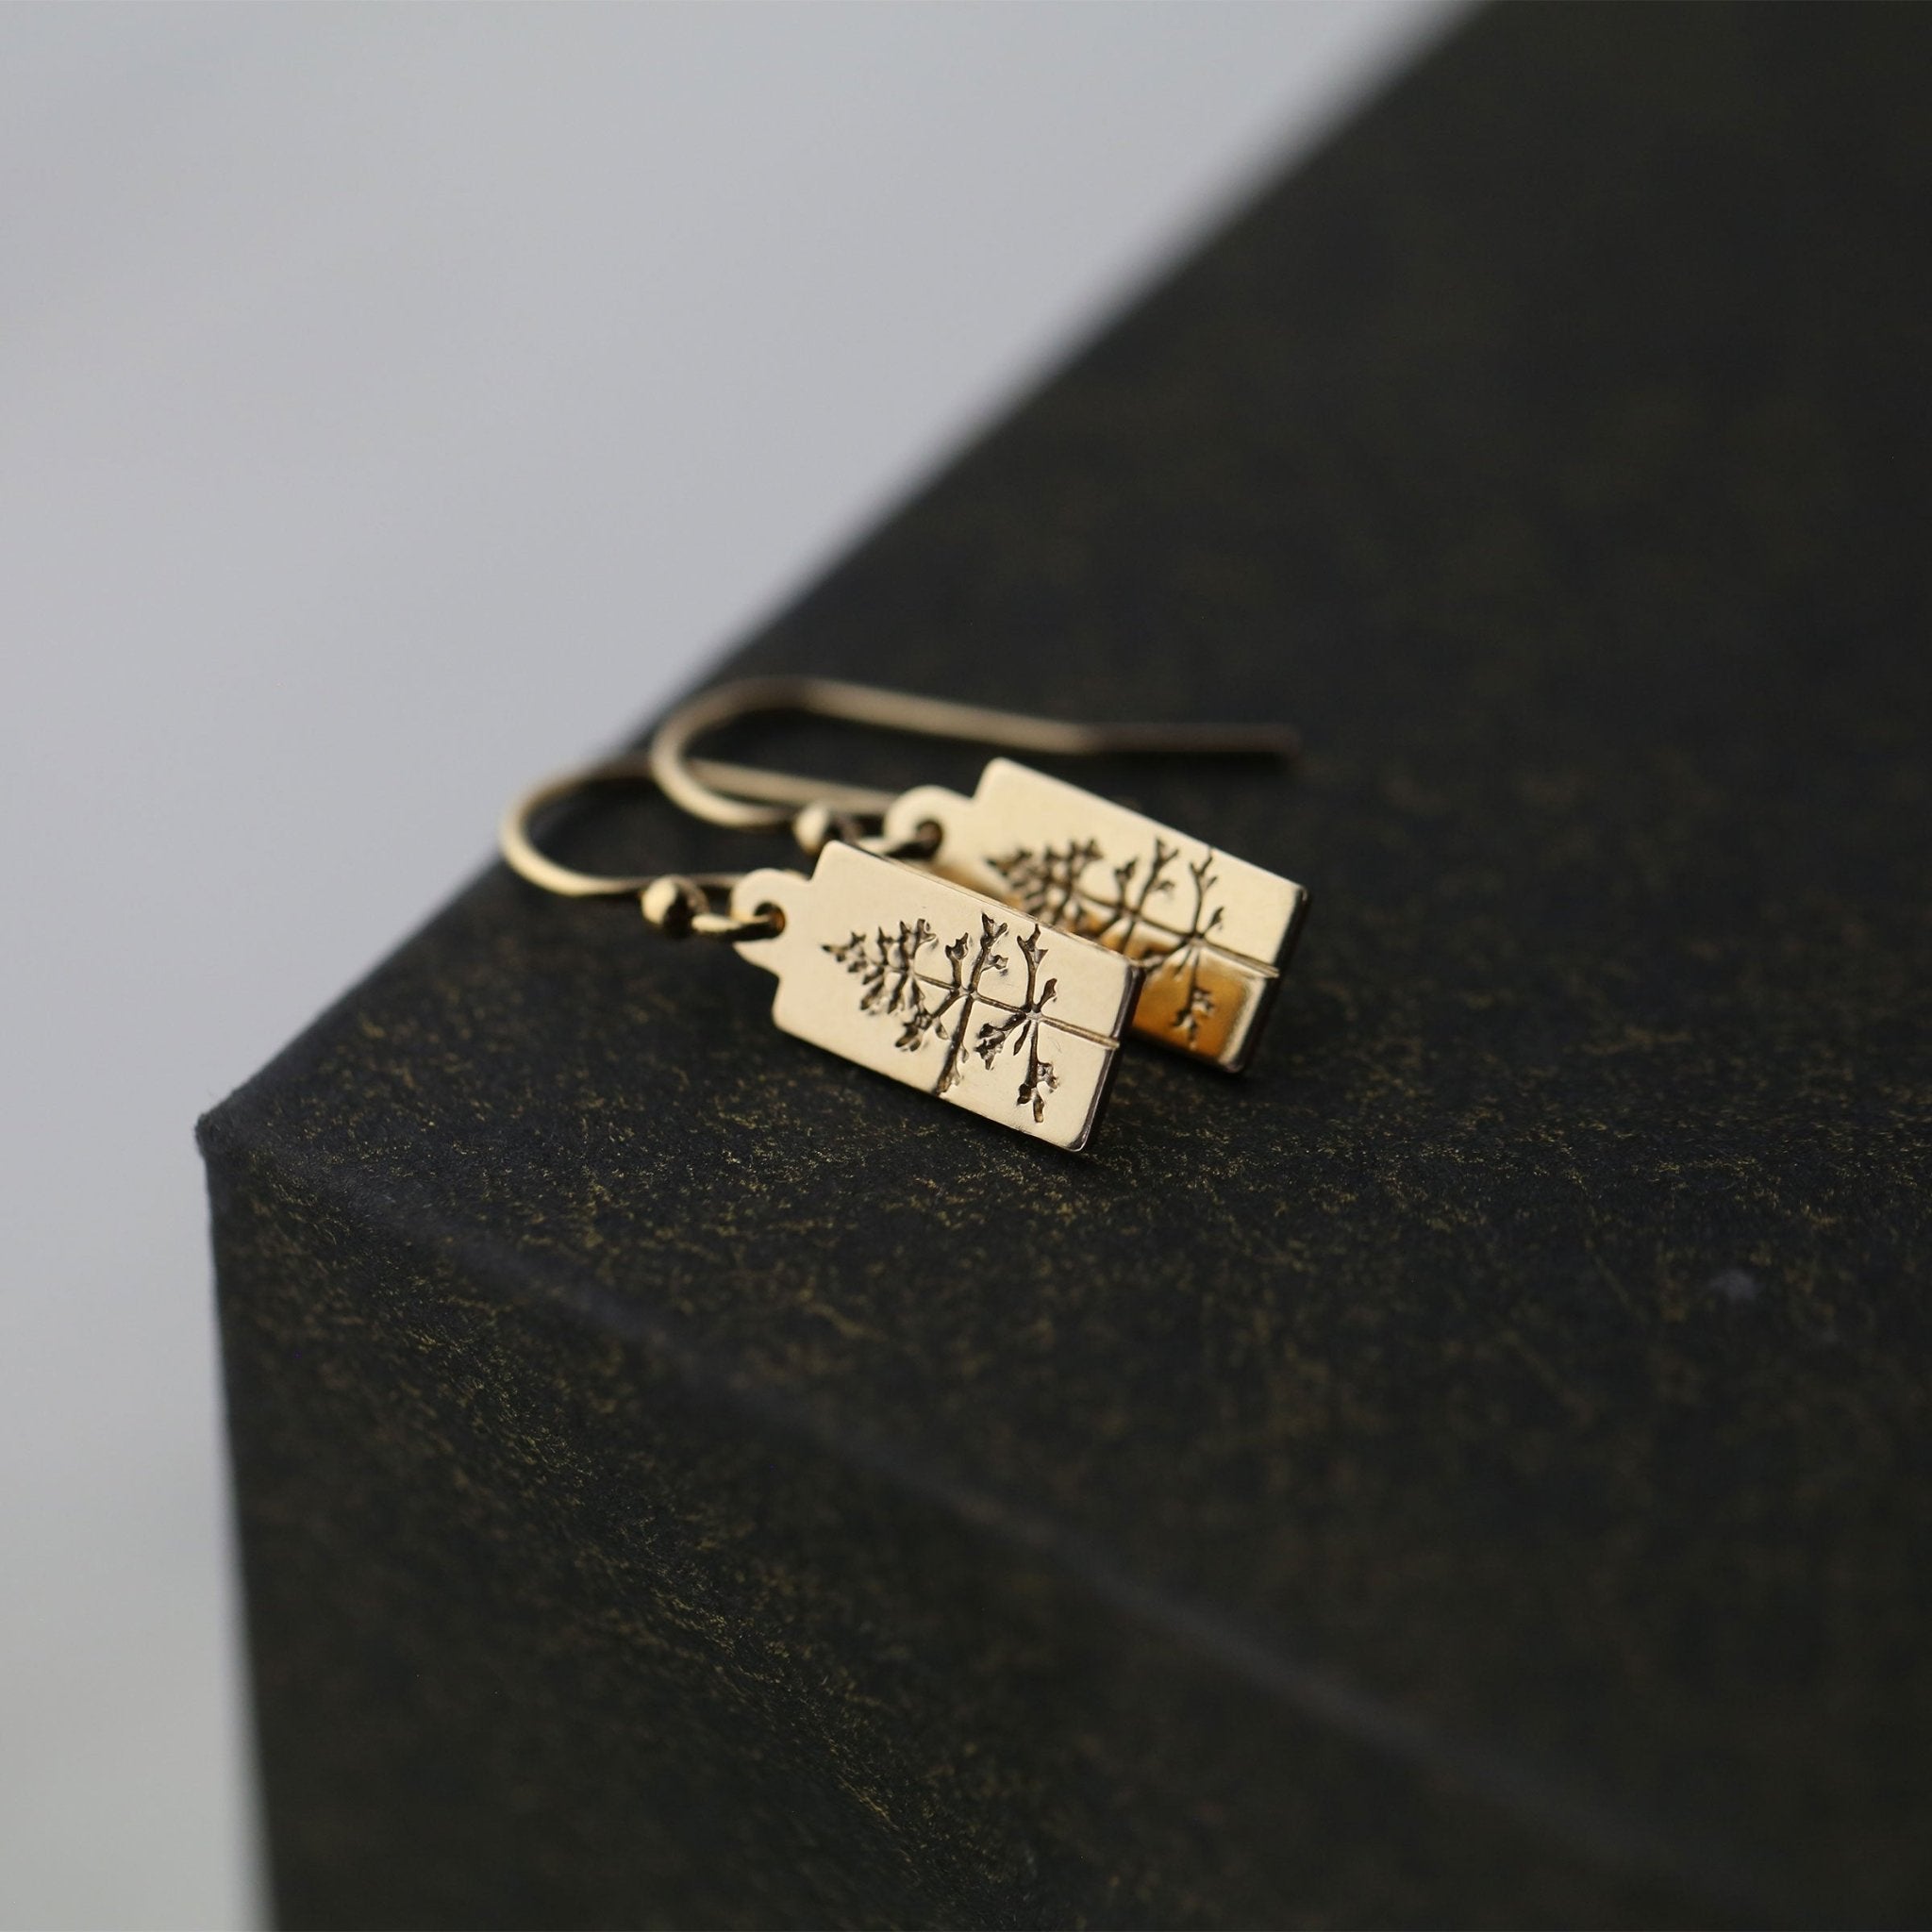 Hand Stamped Gold Tree Tag Earrings